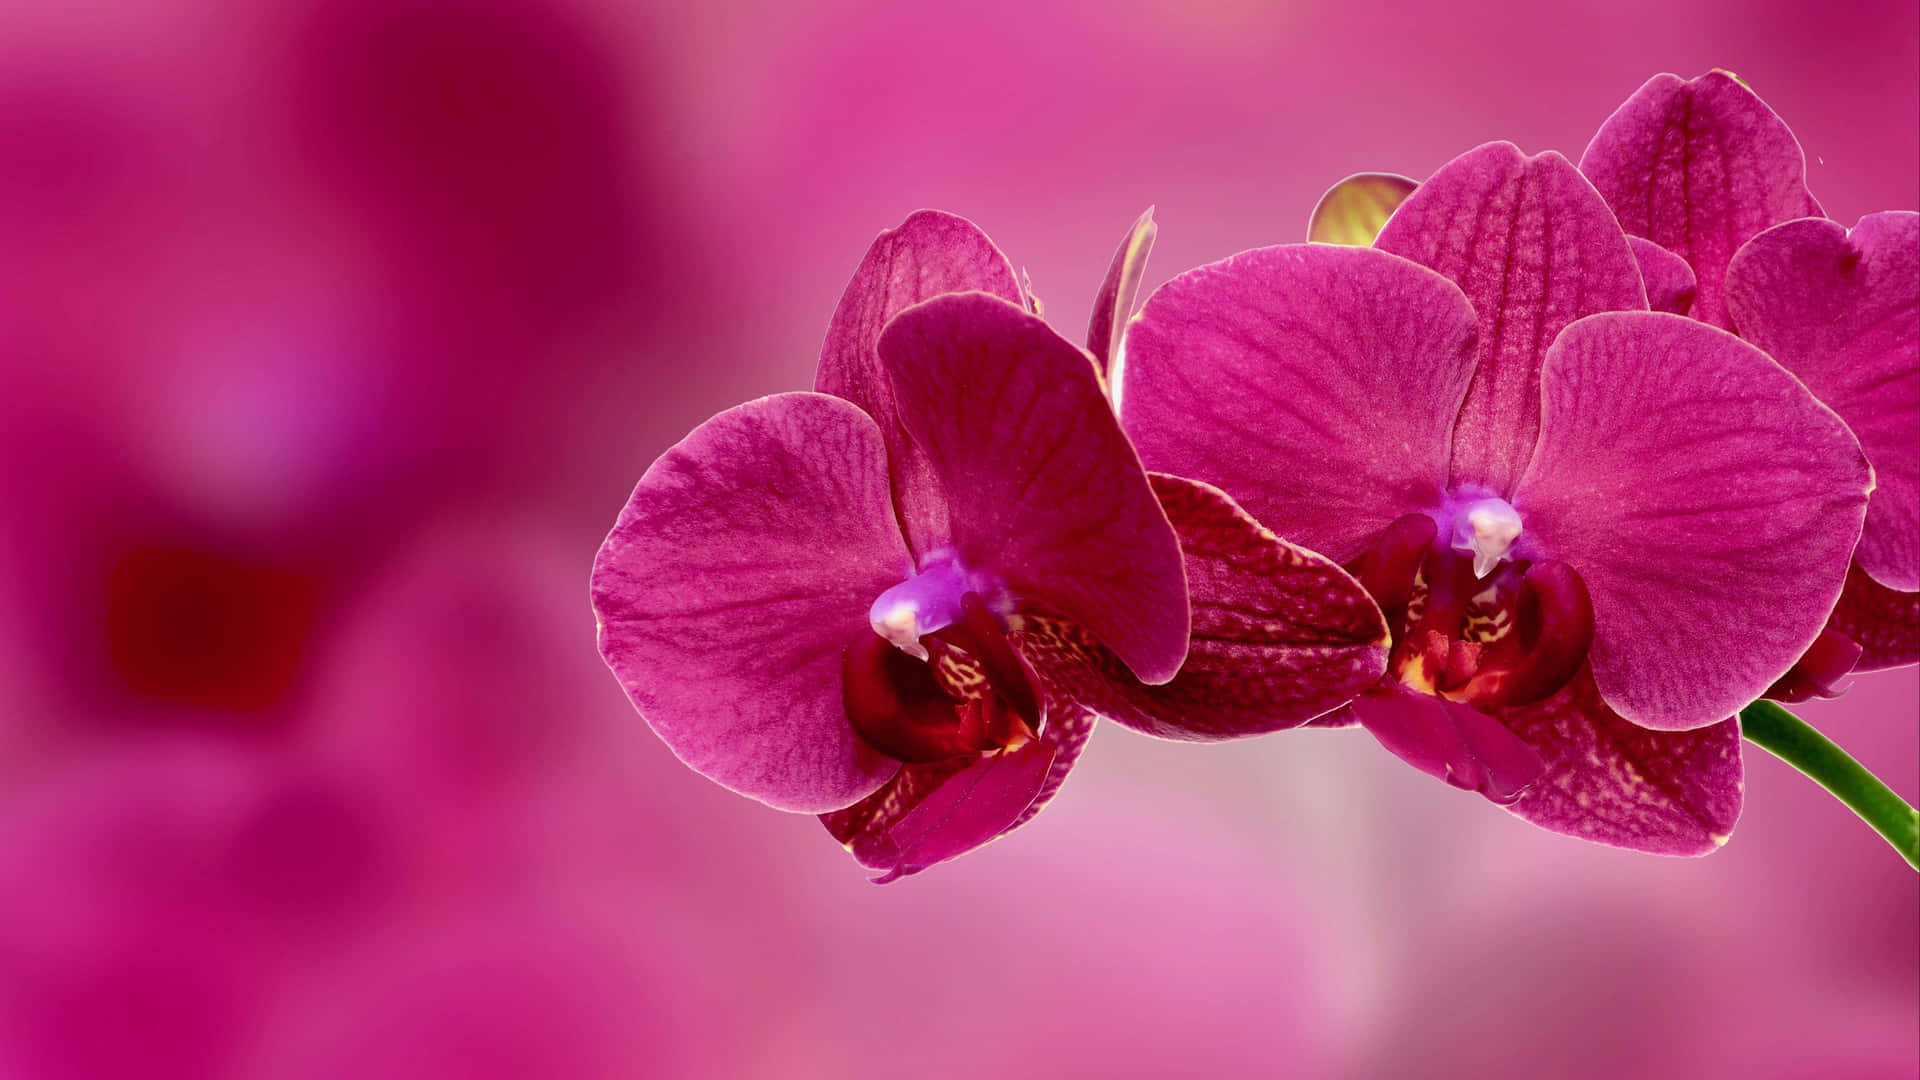 The beauty of a rare pink orchid in full bloom